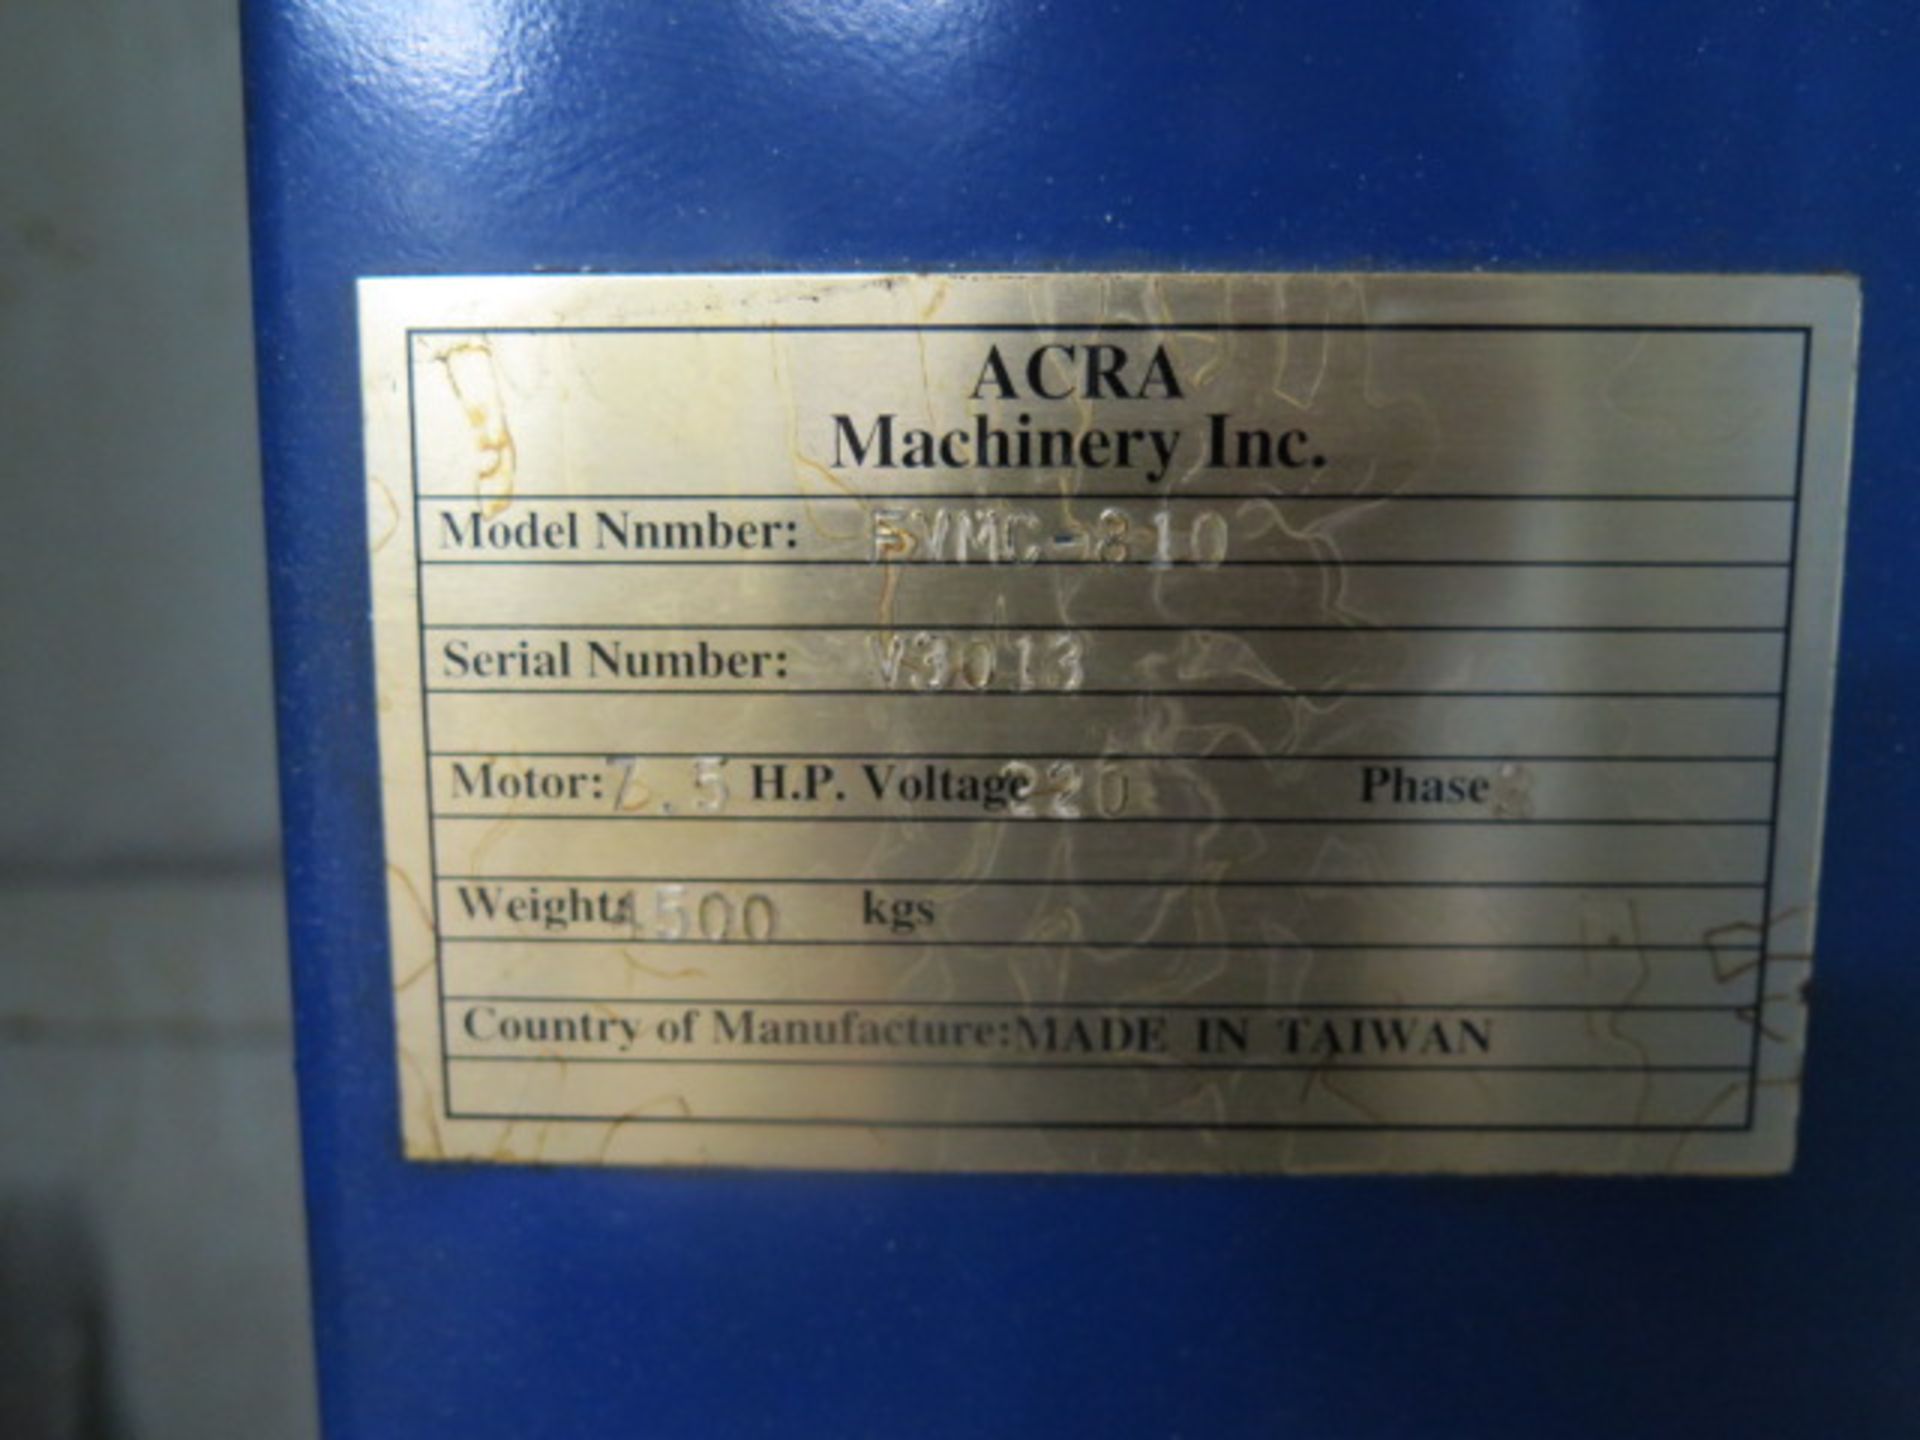 Acra FVMC-810 CNC VMC s/n V3013 w/ Mitsubishi Controls, 16-Station ATC, SOLD AS IS - Image 12 of 12